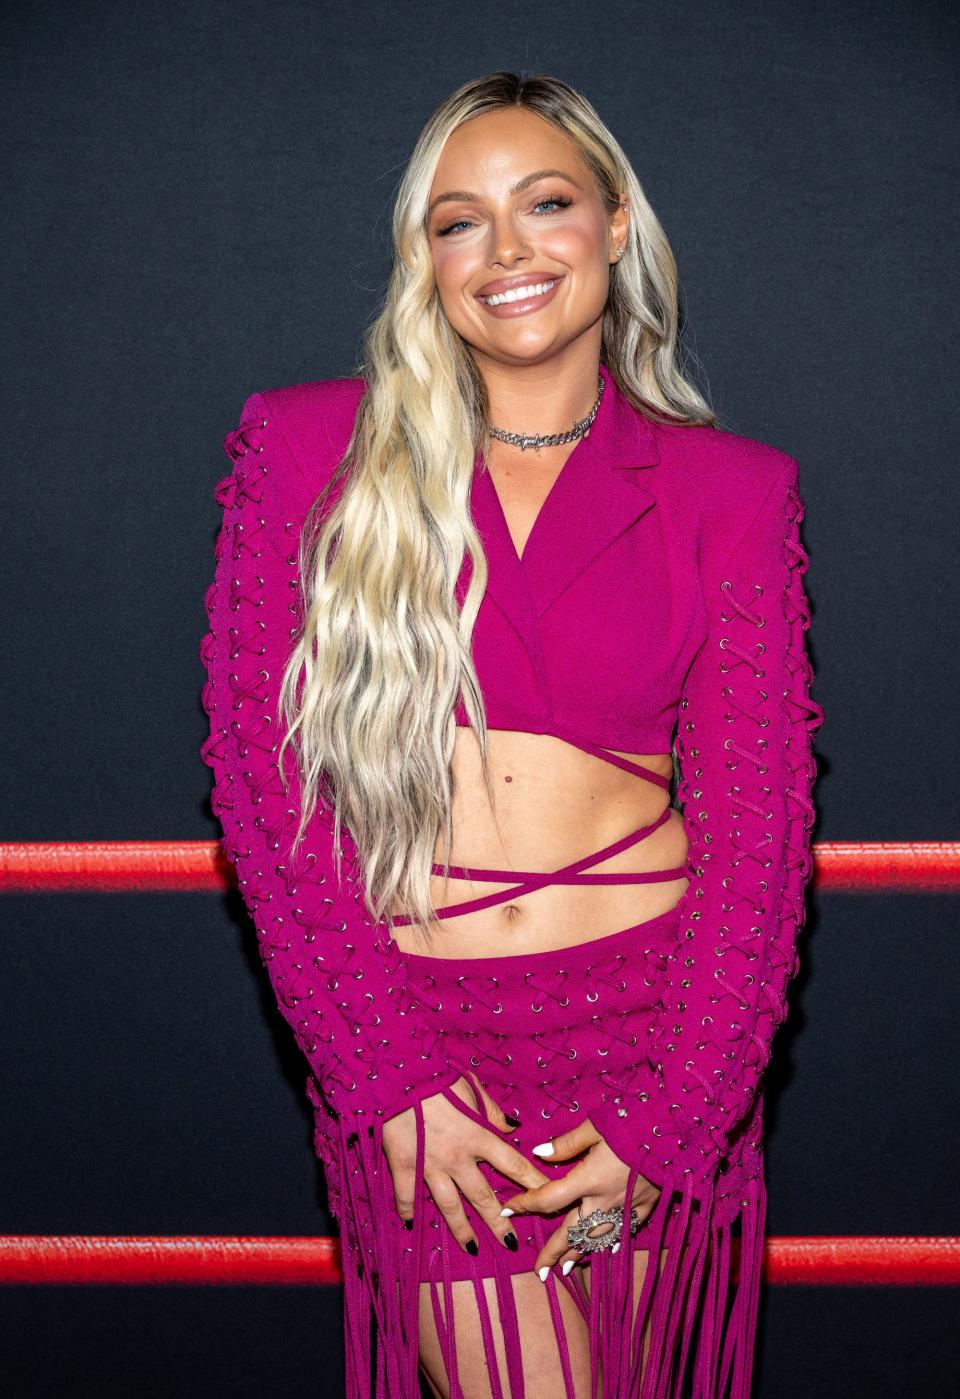 Liv Morgan in a pick crop top jacket and pink skirt at "The Iron Claw" premiere